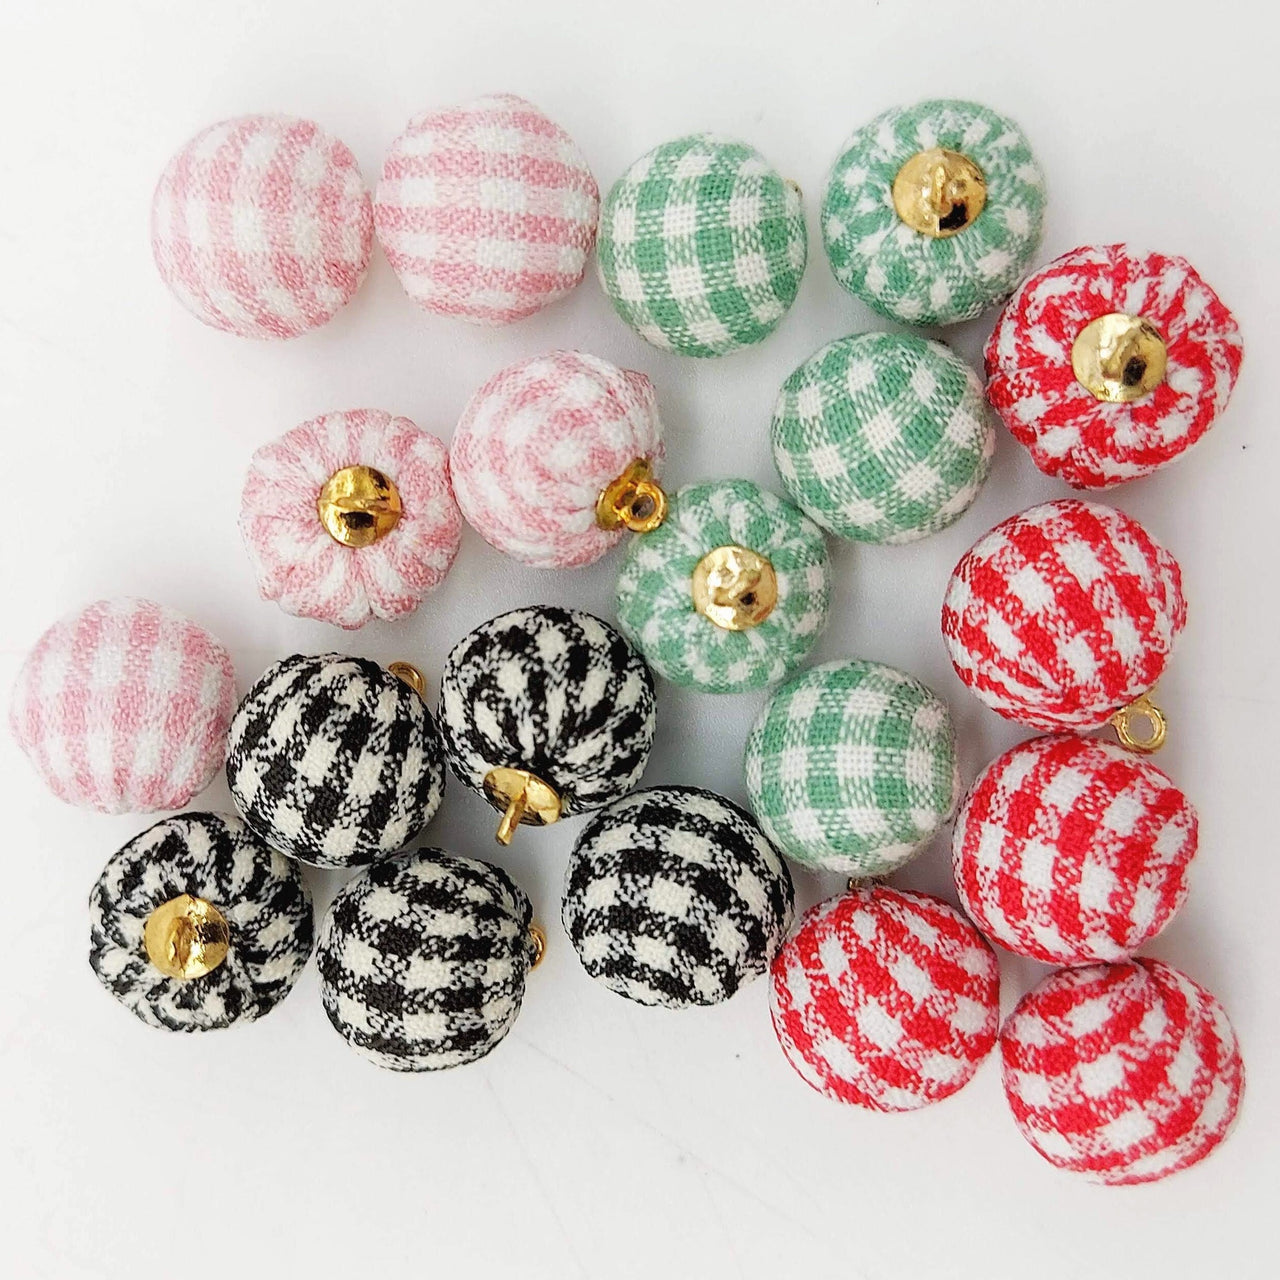 Black and White Checkered Cotton Small Fabric Balls Tassel, Button with Ring Cap, Decorative Tassels